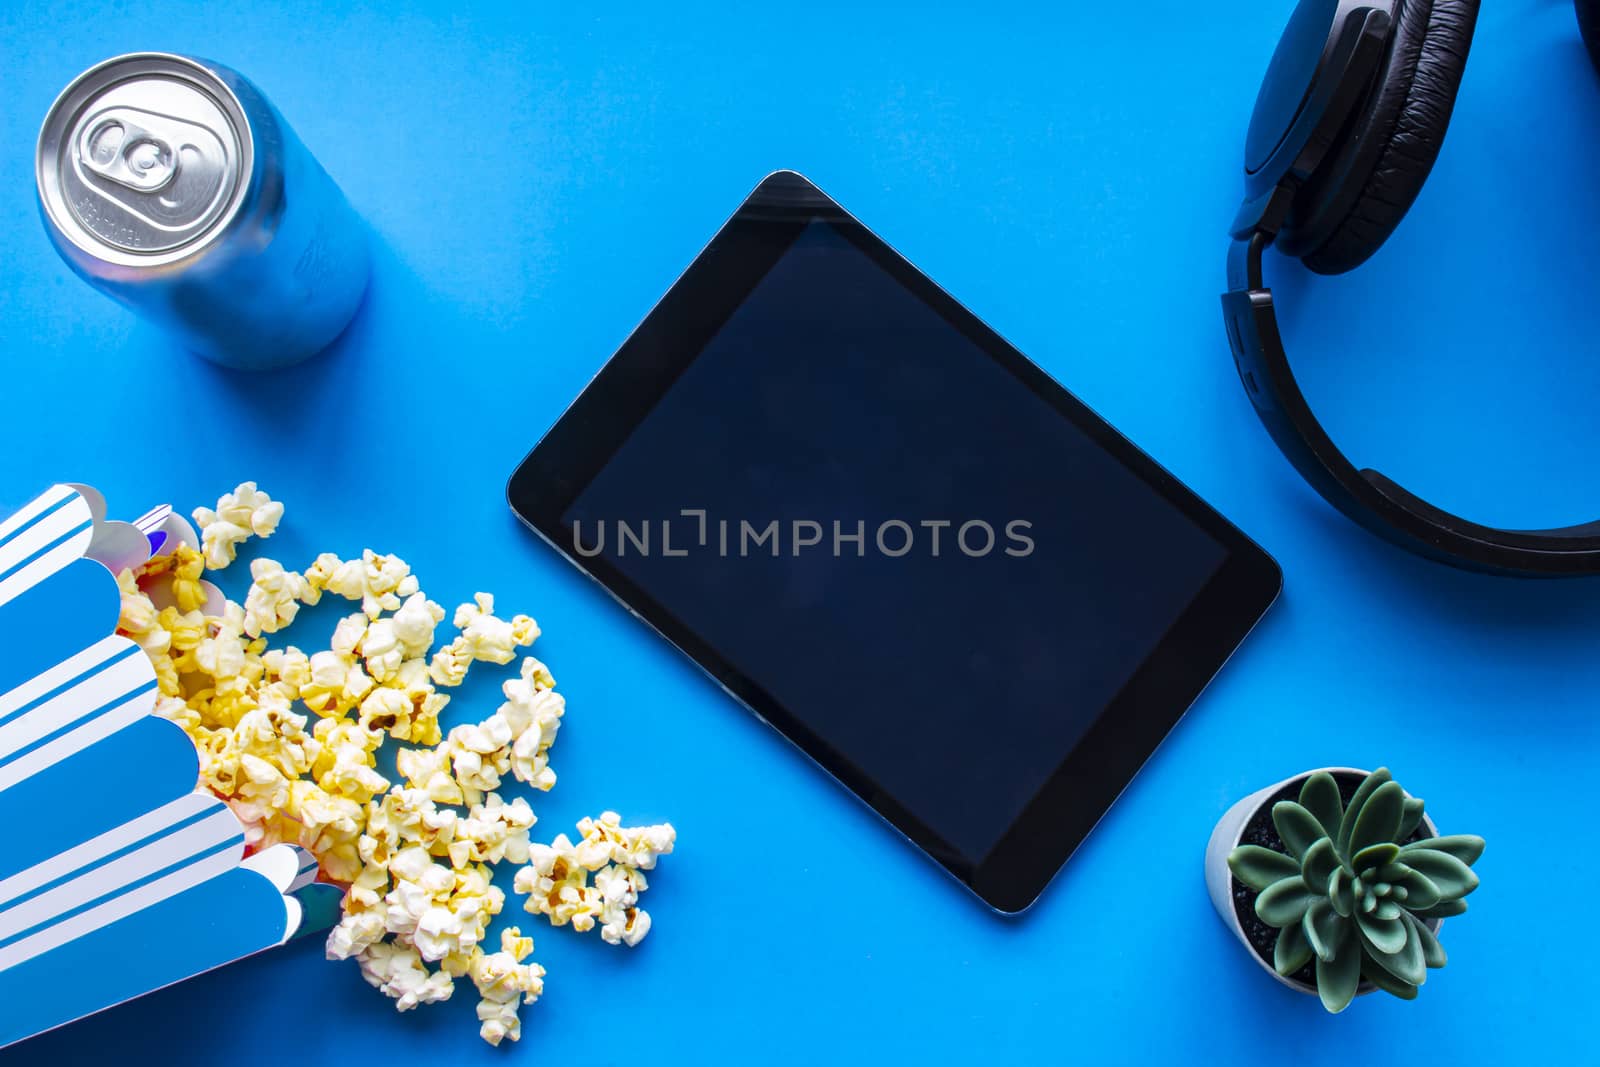 A tablet on a blue background with popcorn and headphones by oasisamuel